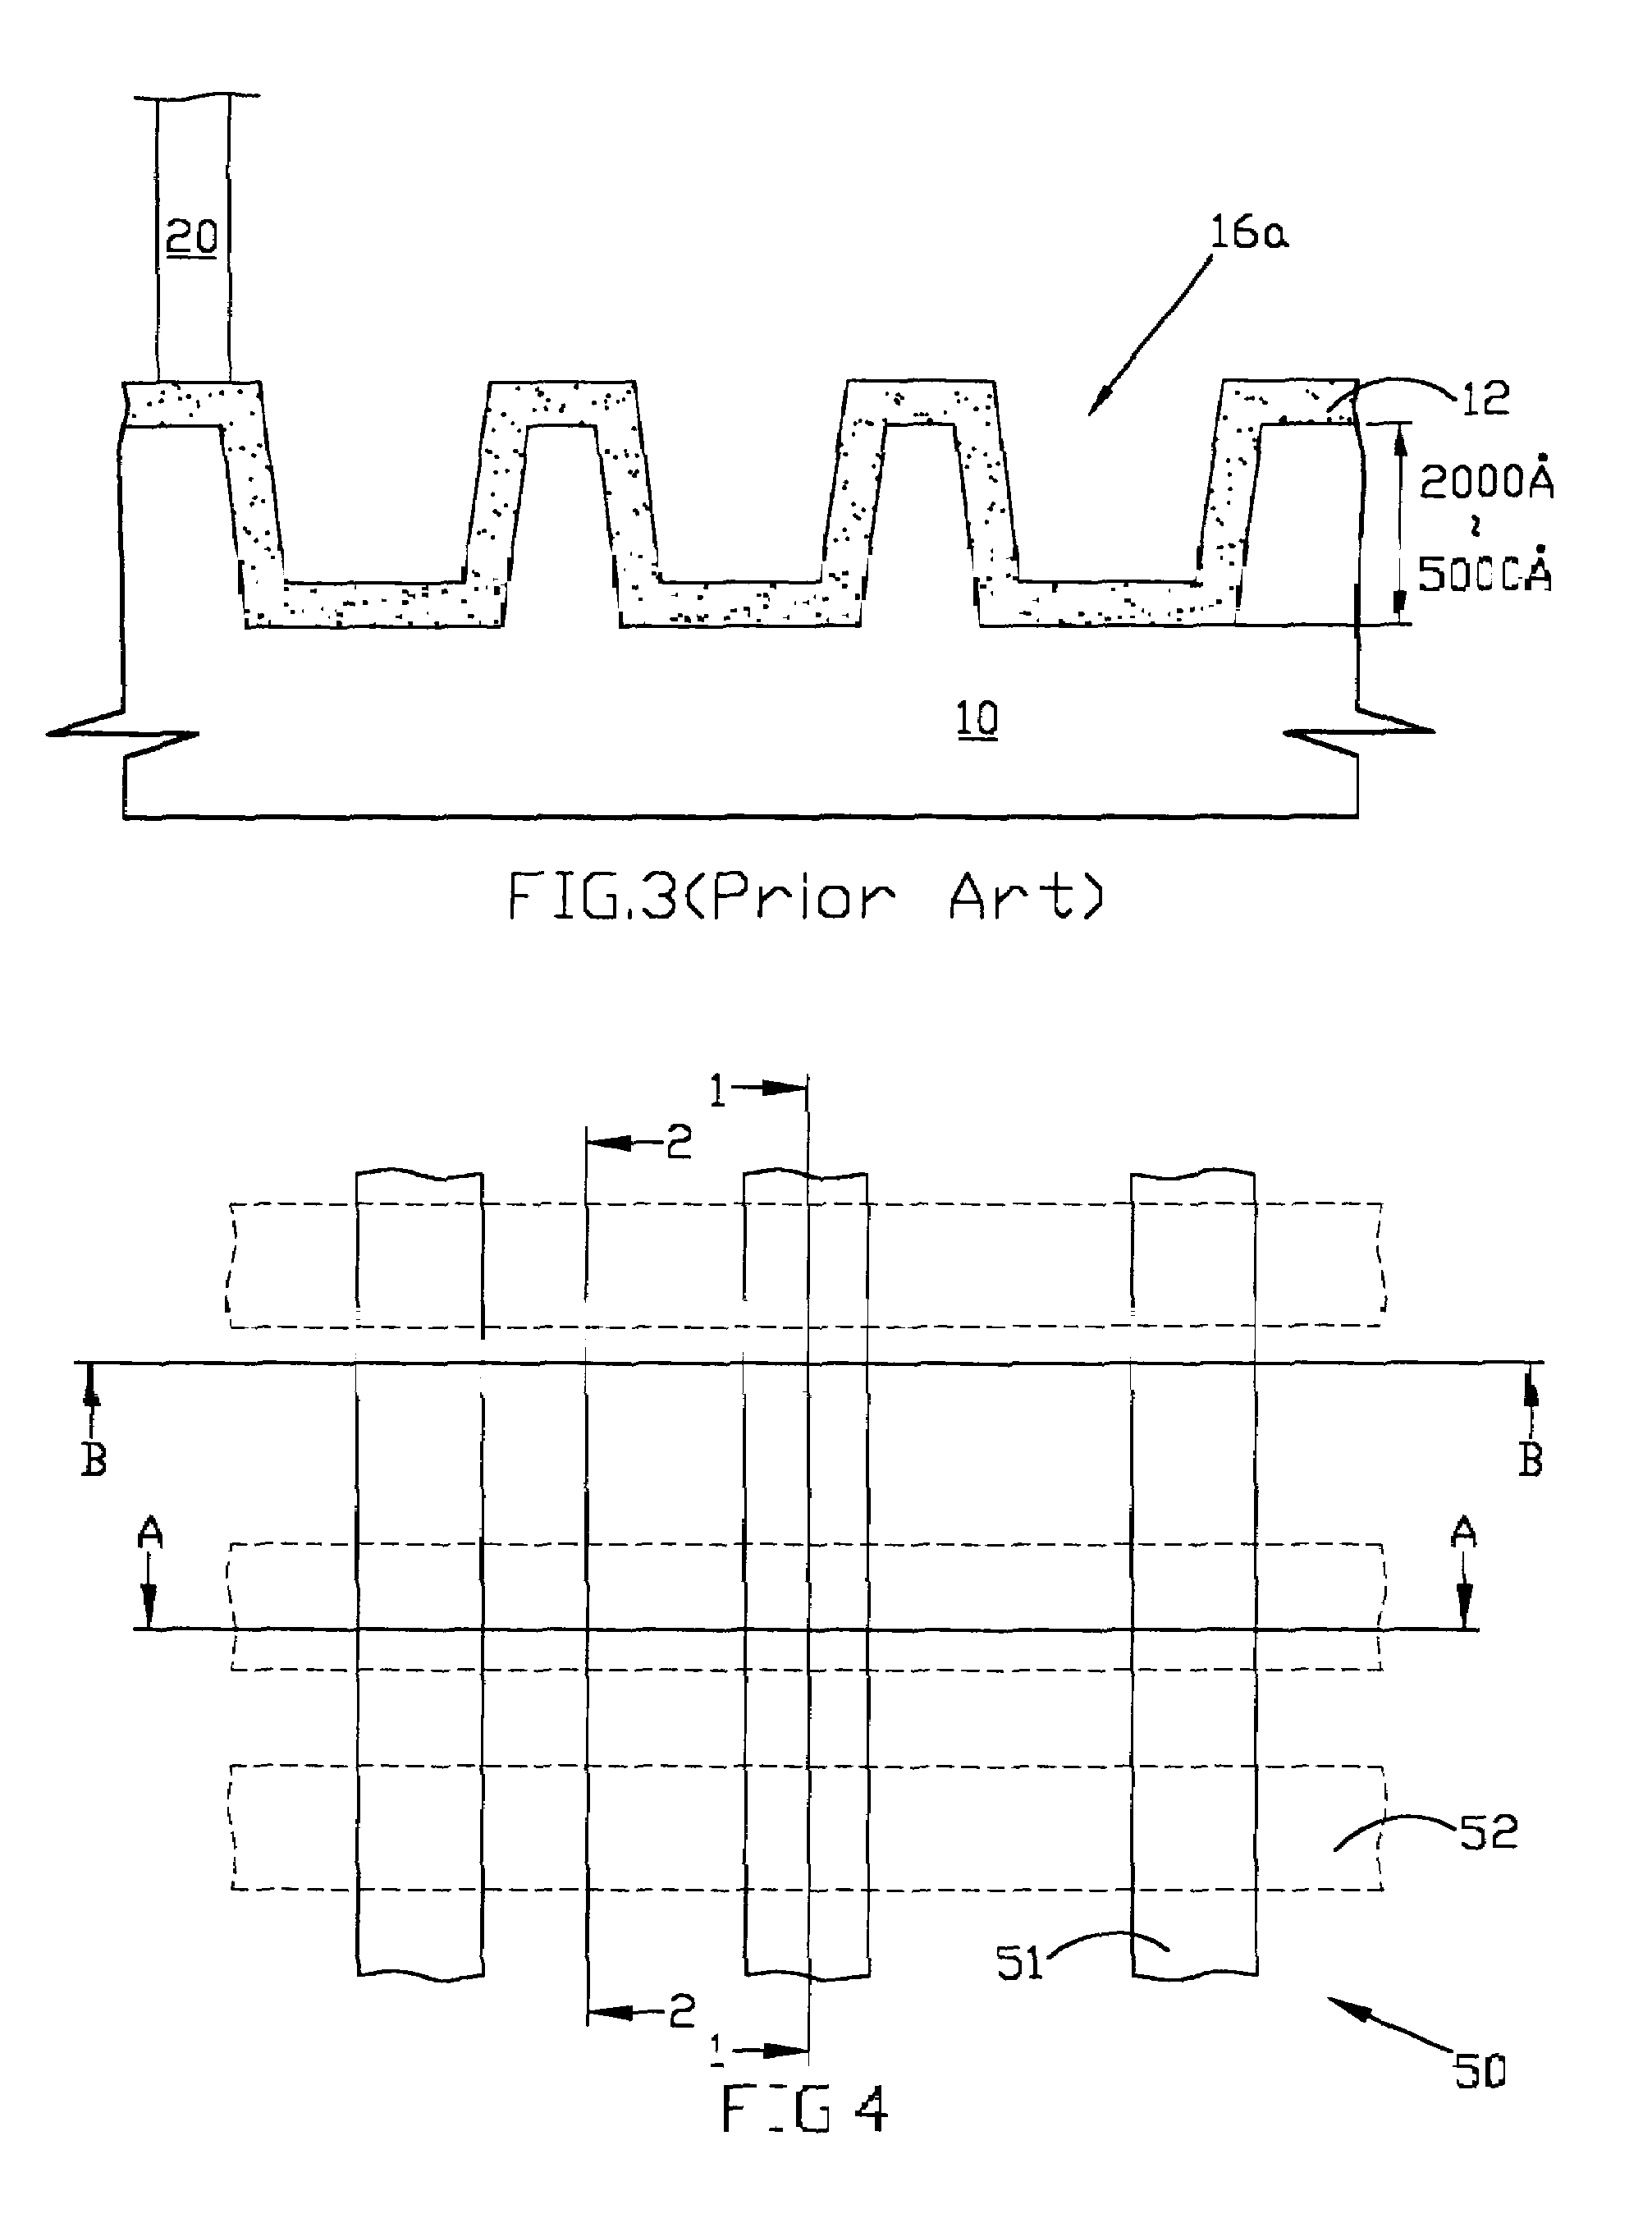 Method for forming a buried diffusion layer with reducing topography in a surface of a semiconductor substrate